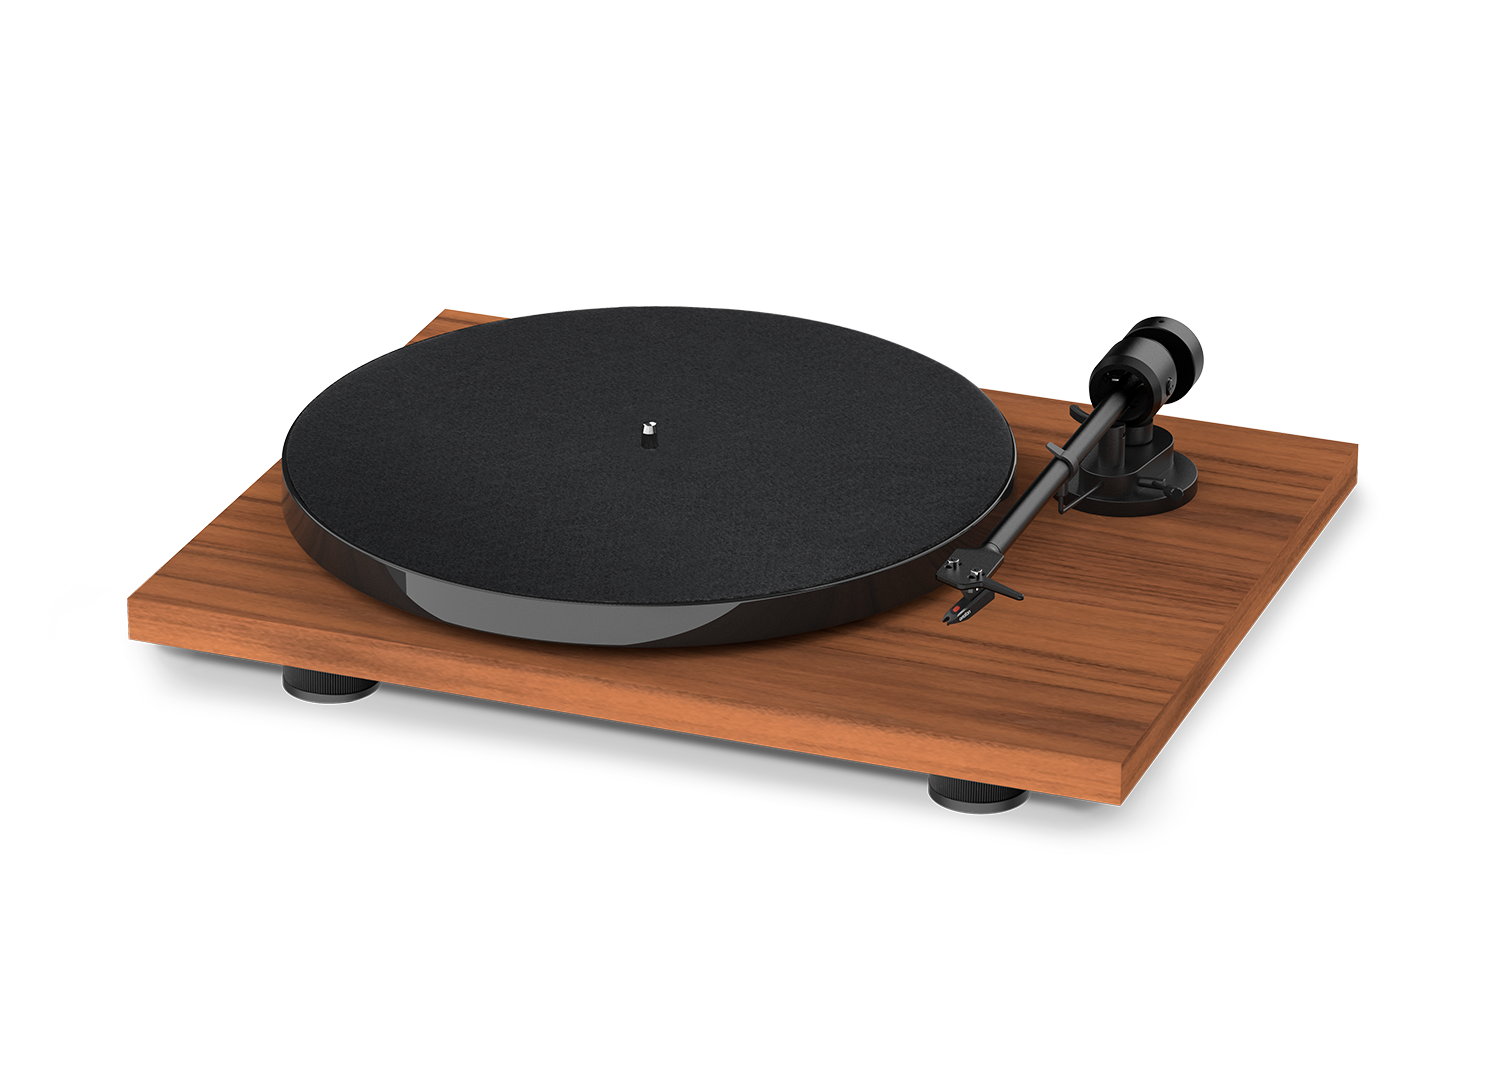 The Pro-Ject E1 Turntable Serves Up Crystal Clear Sound Without Deleting Your Wallet